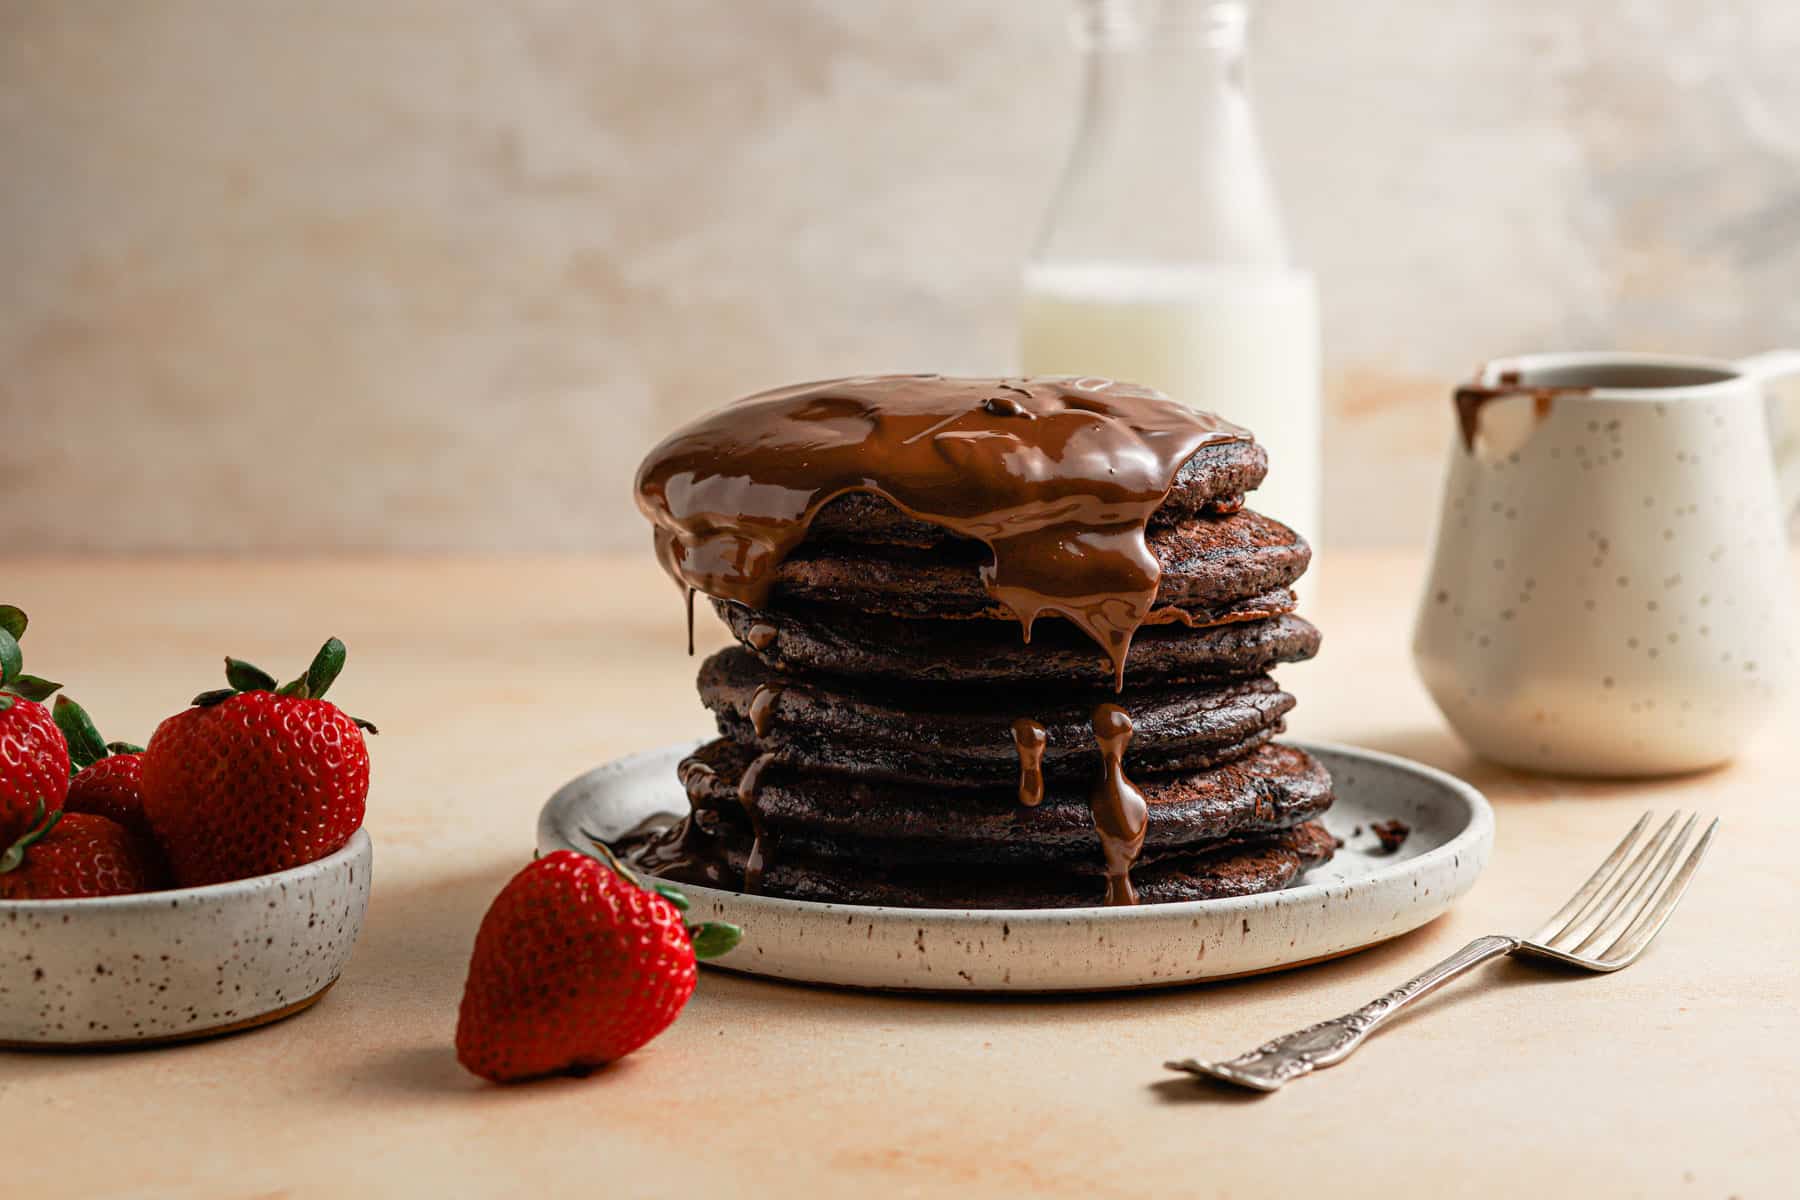 Chocolate Pancakes (With A Secret Ingredient)